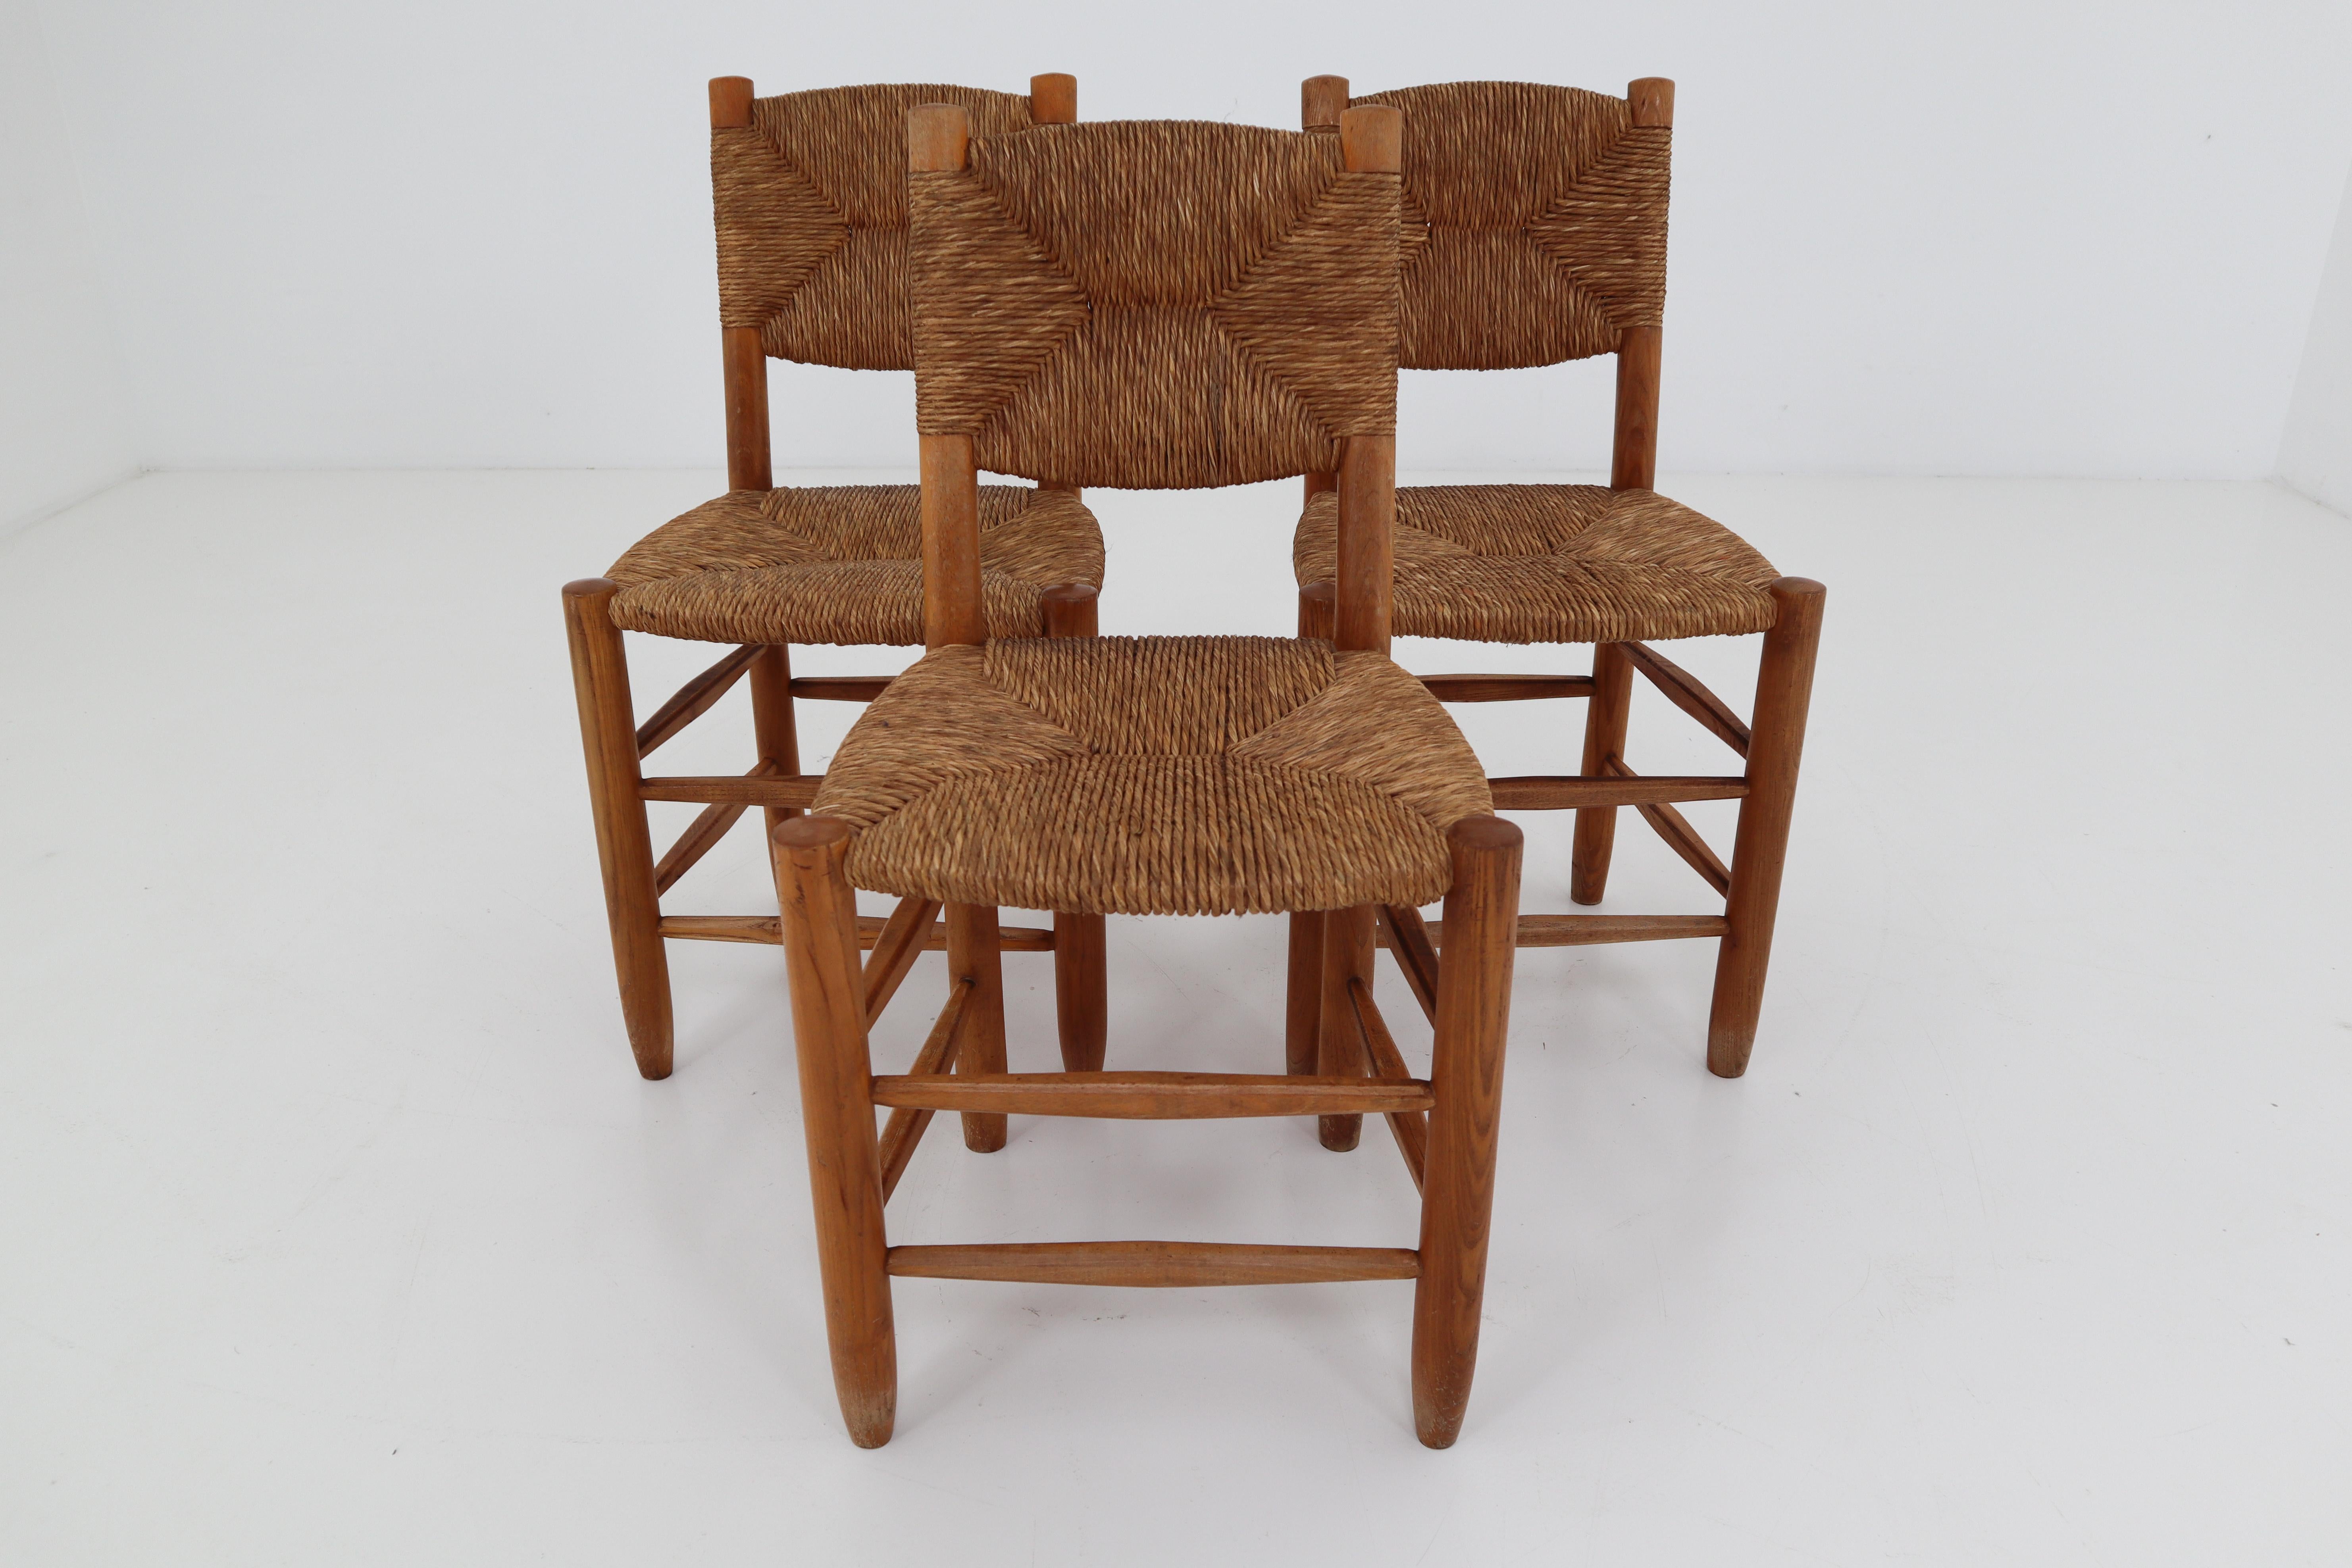 A pair of three dining chairs of wood and straw in one of the quintessential midcentury designs of their creator, the famous French furniture maker Charlotte Perriand. The three chairs are identical in the patina as in their very uniform state.